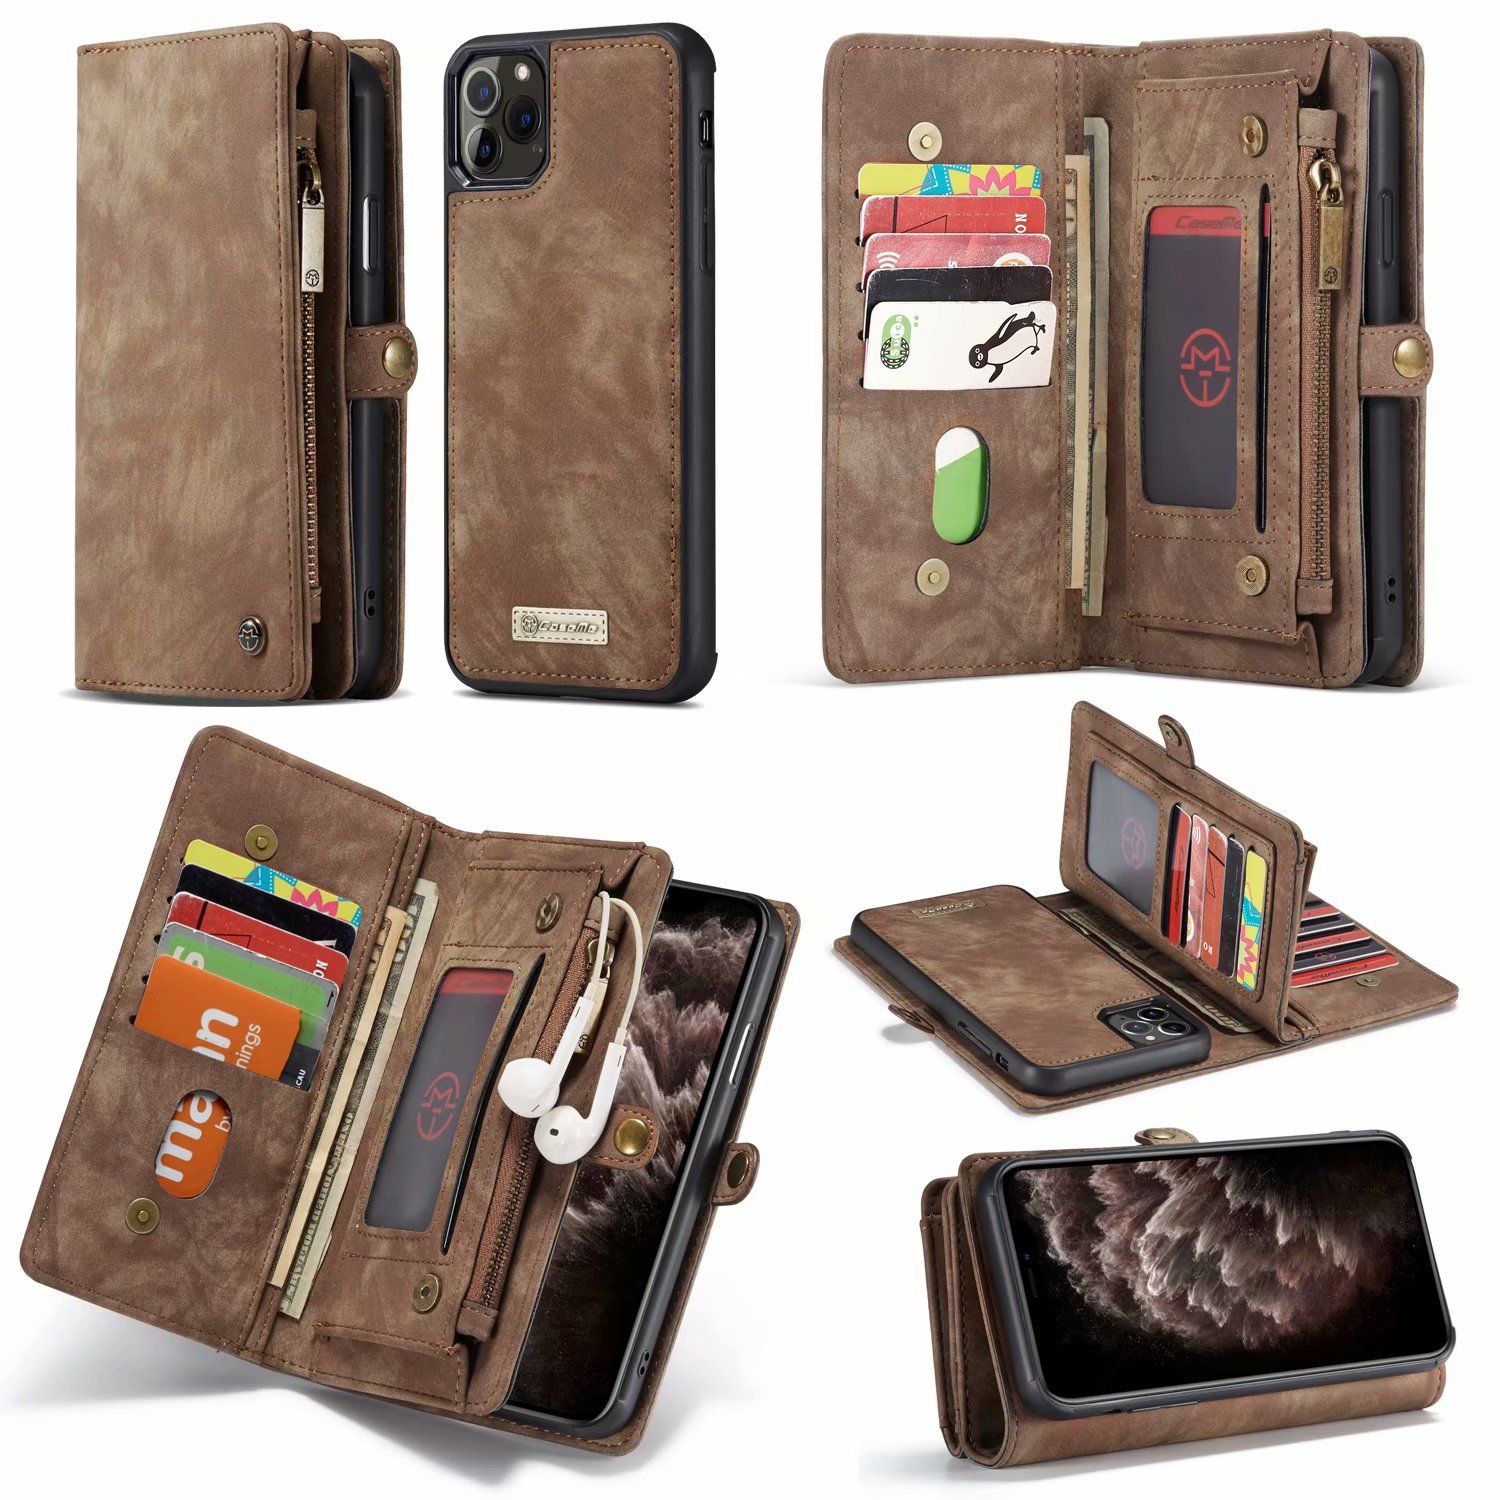 Caseme 2in1 Retro Leather Purse Stand Magnetic Flip Wallet Case For ...